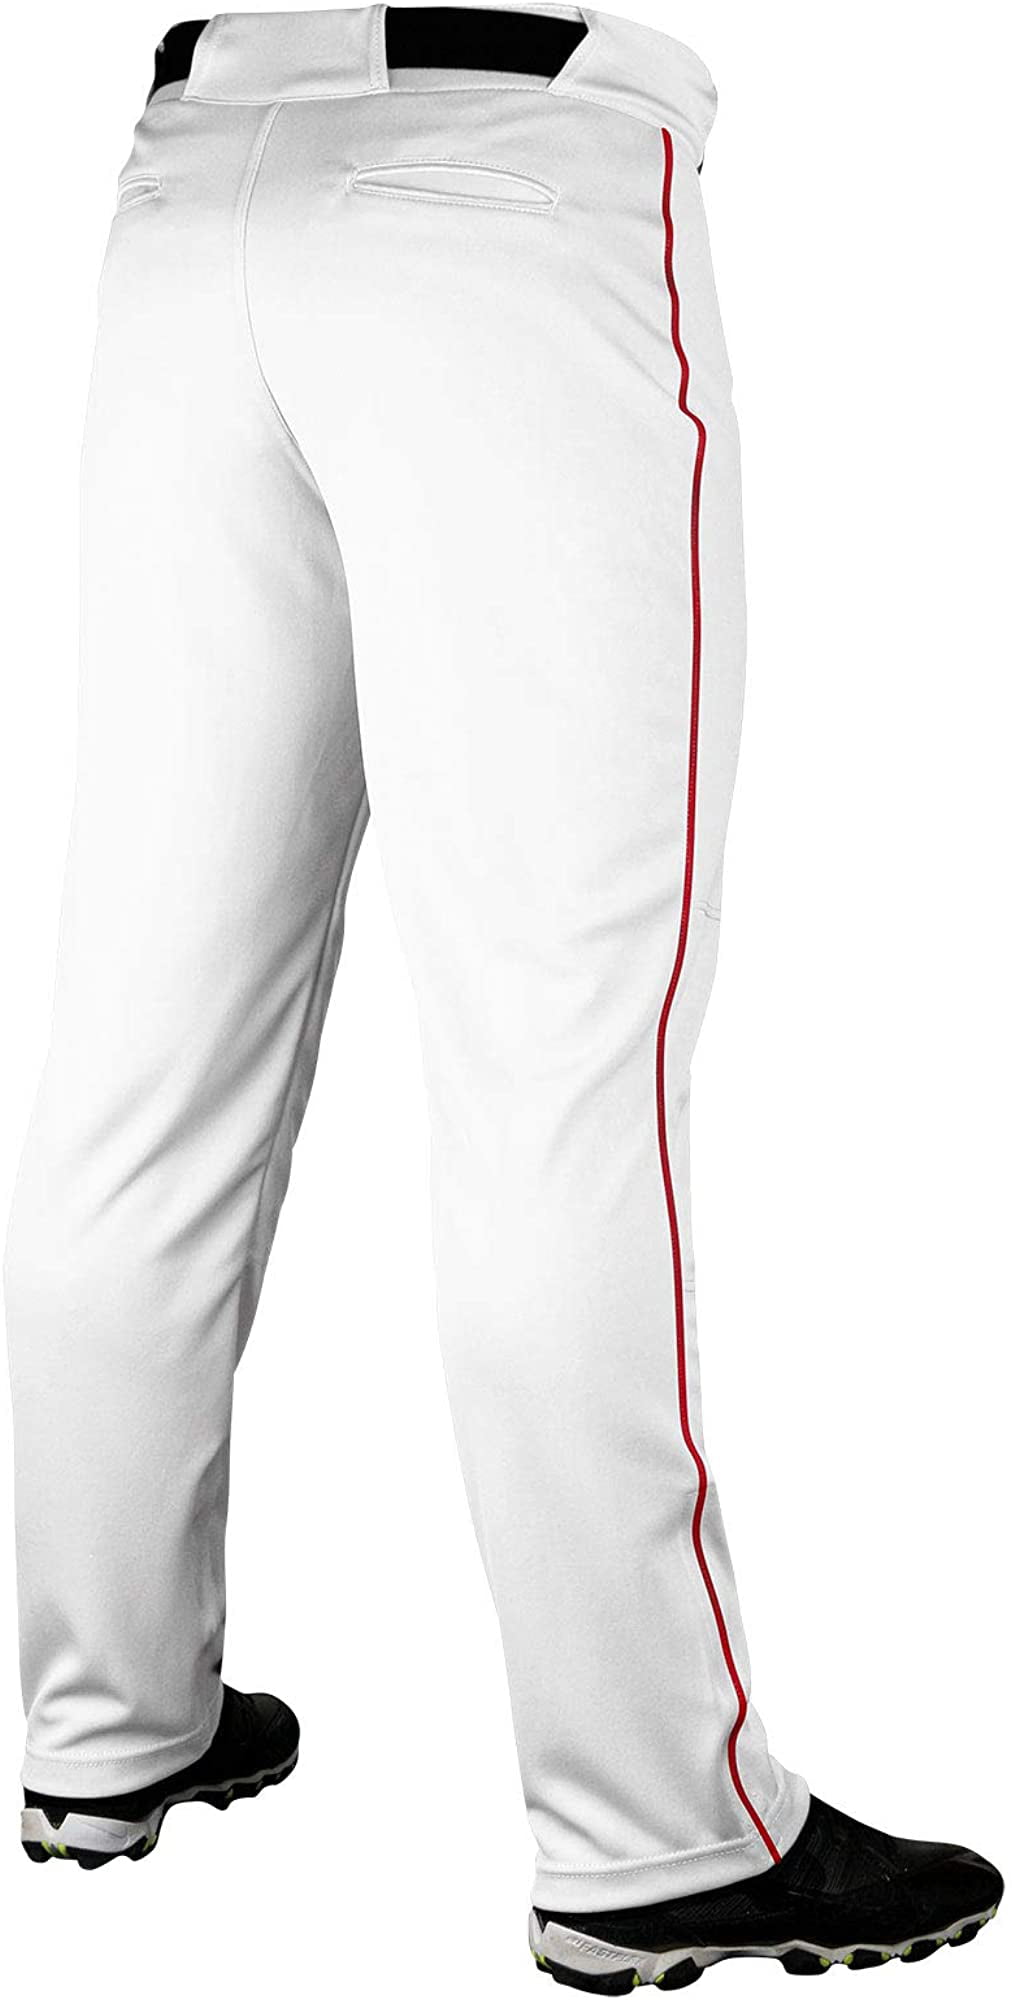 Champro Adult Triple Crown Piped Open Bottom Baseball Pants W/ Adjustable Inseam 